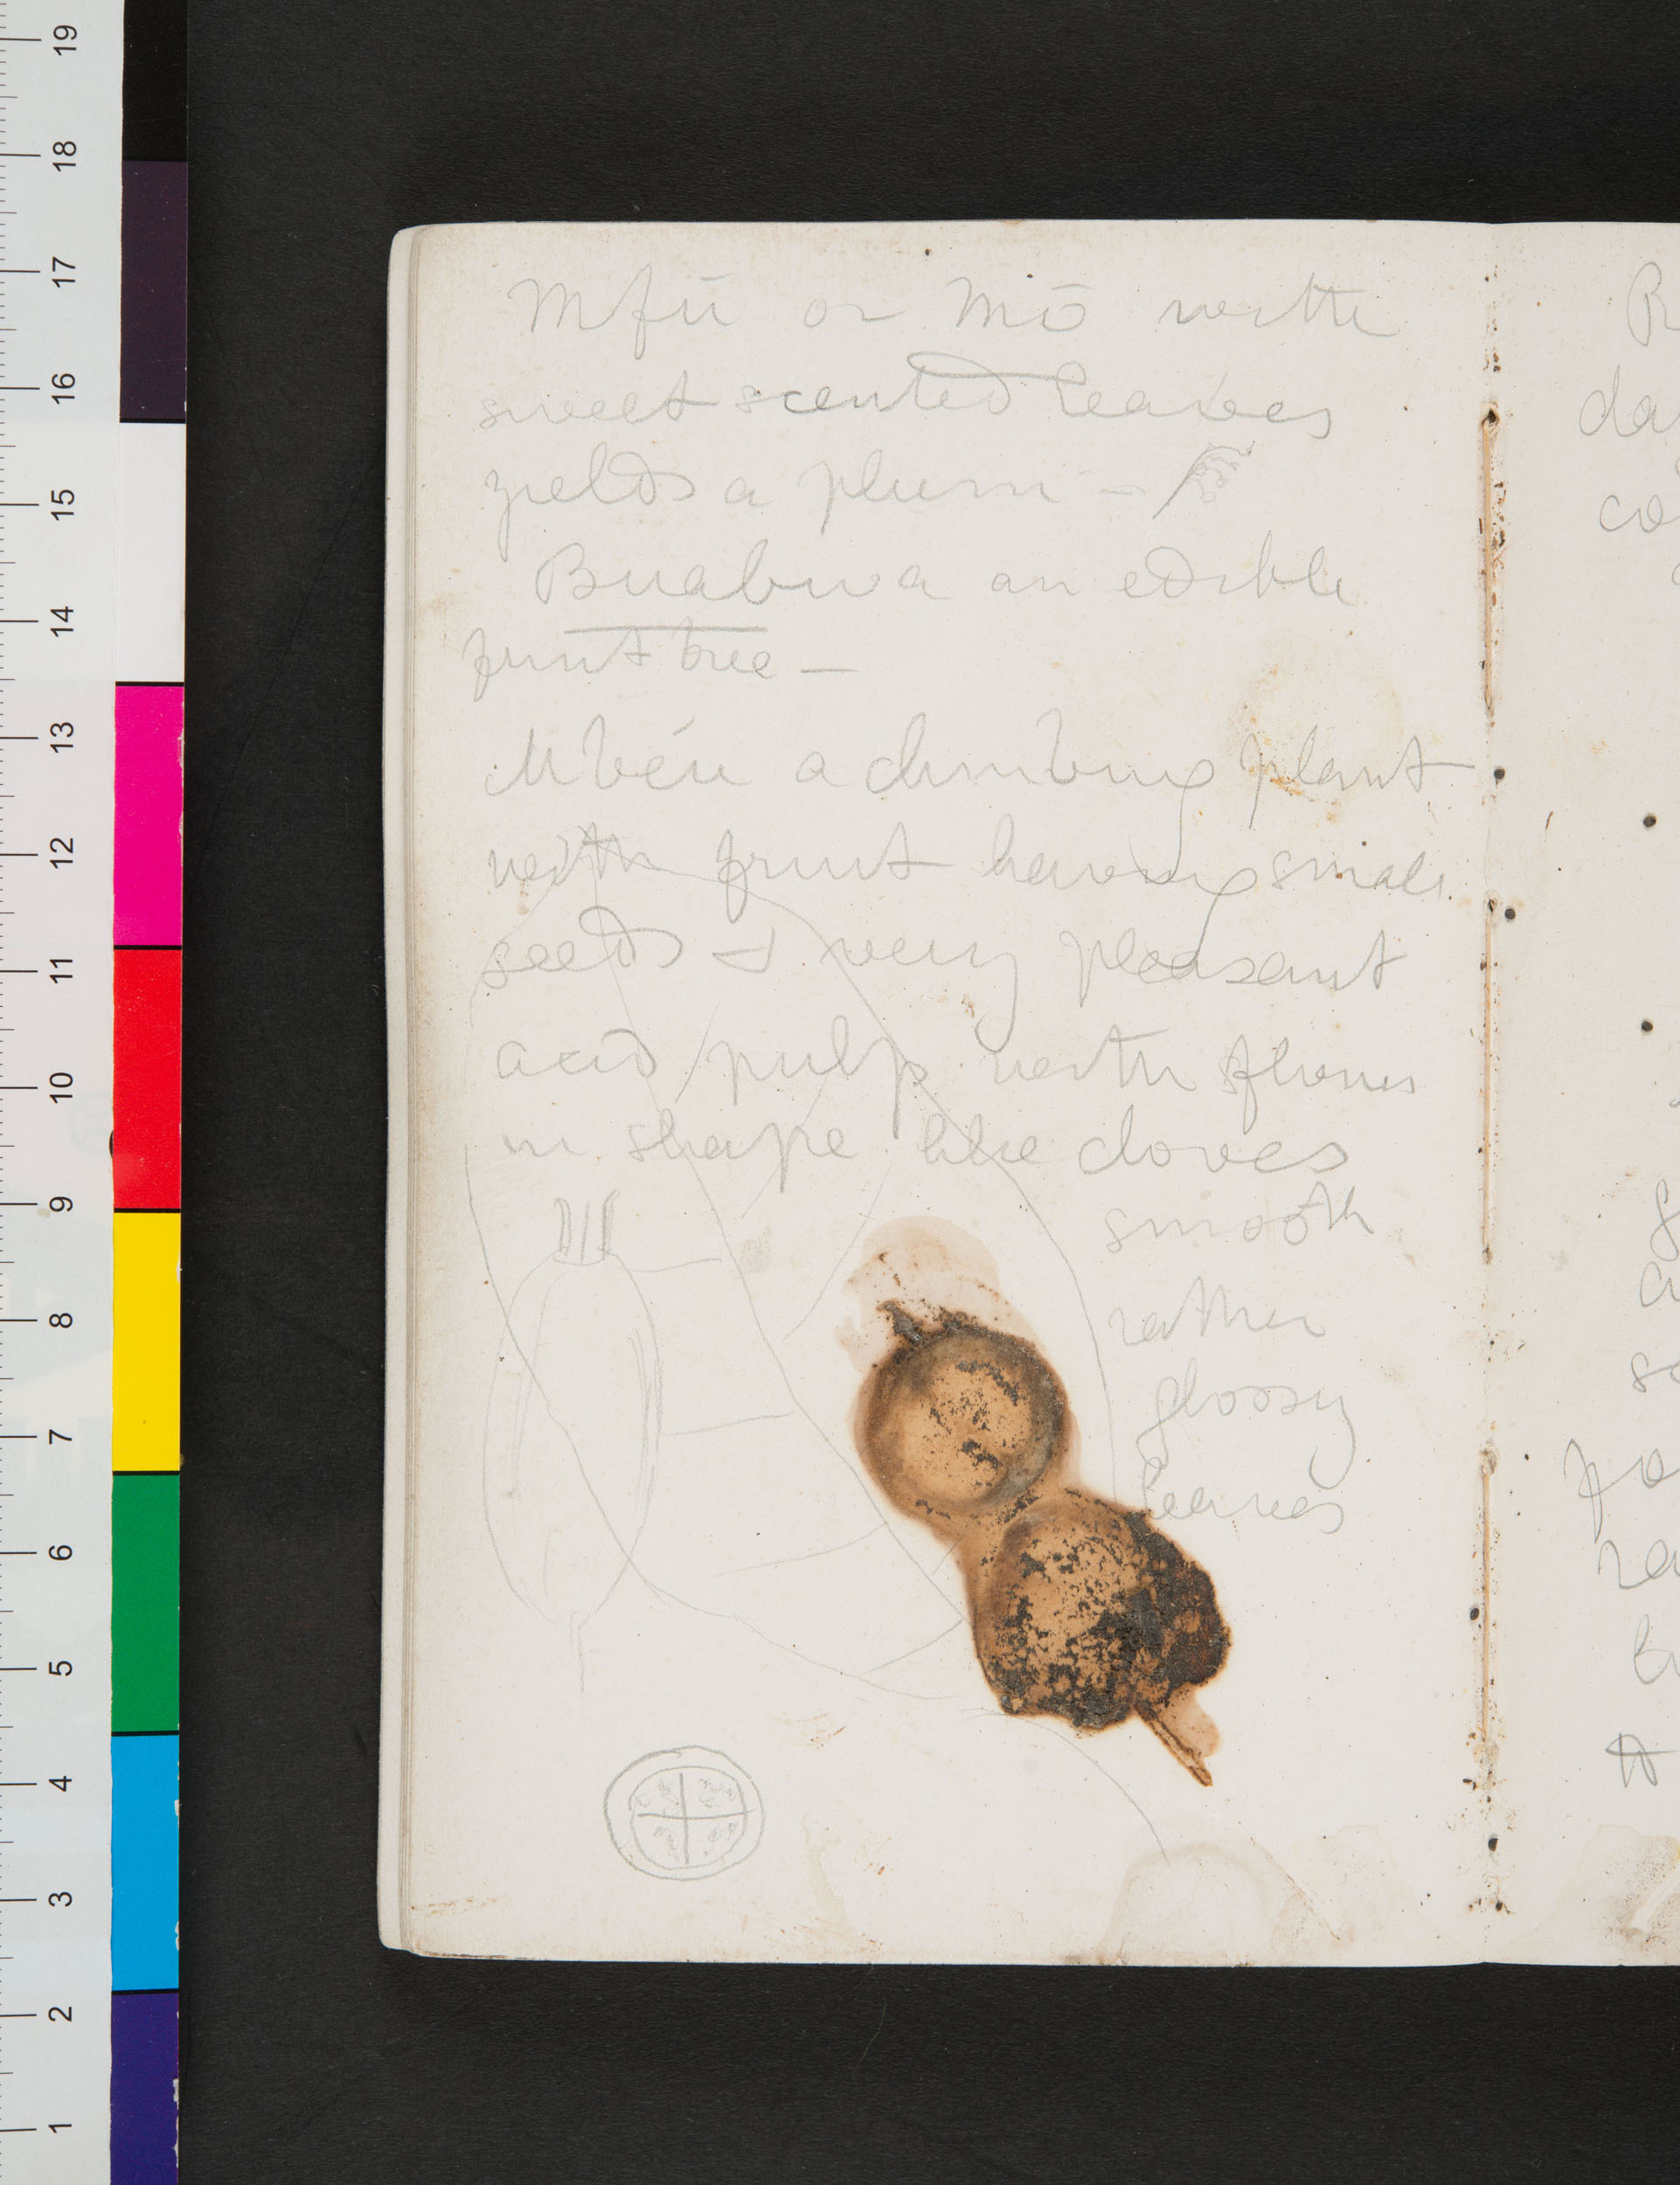 Image of a page of David Livingstone, Field Diary VI (1866e:[36]). Copyright David Livingstone Centre, University of Glasgow Photographic Unit, and Dr. Neil Imray Livingstone Wilson (as relevant). Creative Commons Attribution-NonCommercial 3.0 Unported (https://creativecommons.org/licenses/by-nc/3.0/).